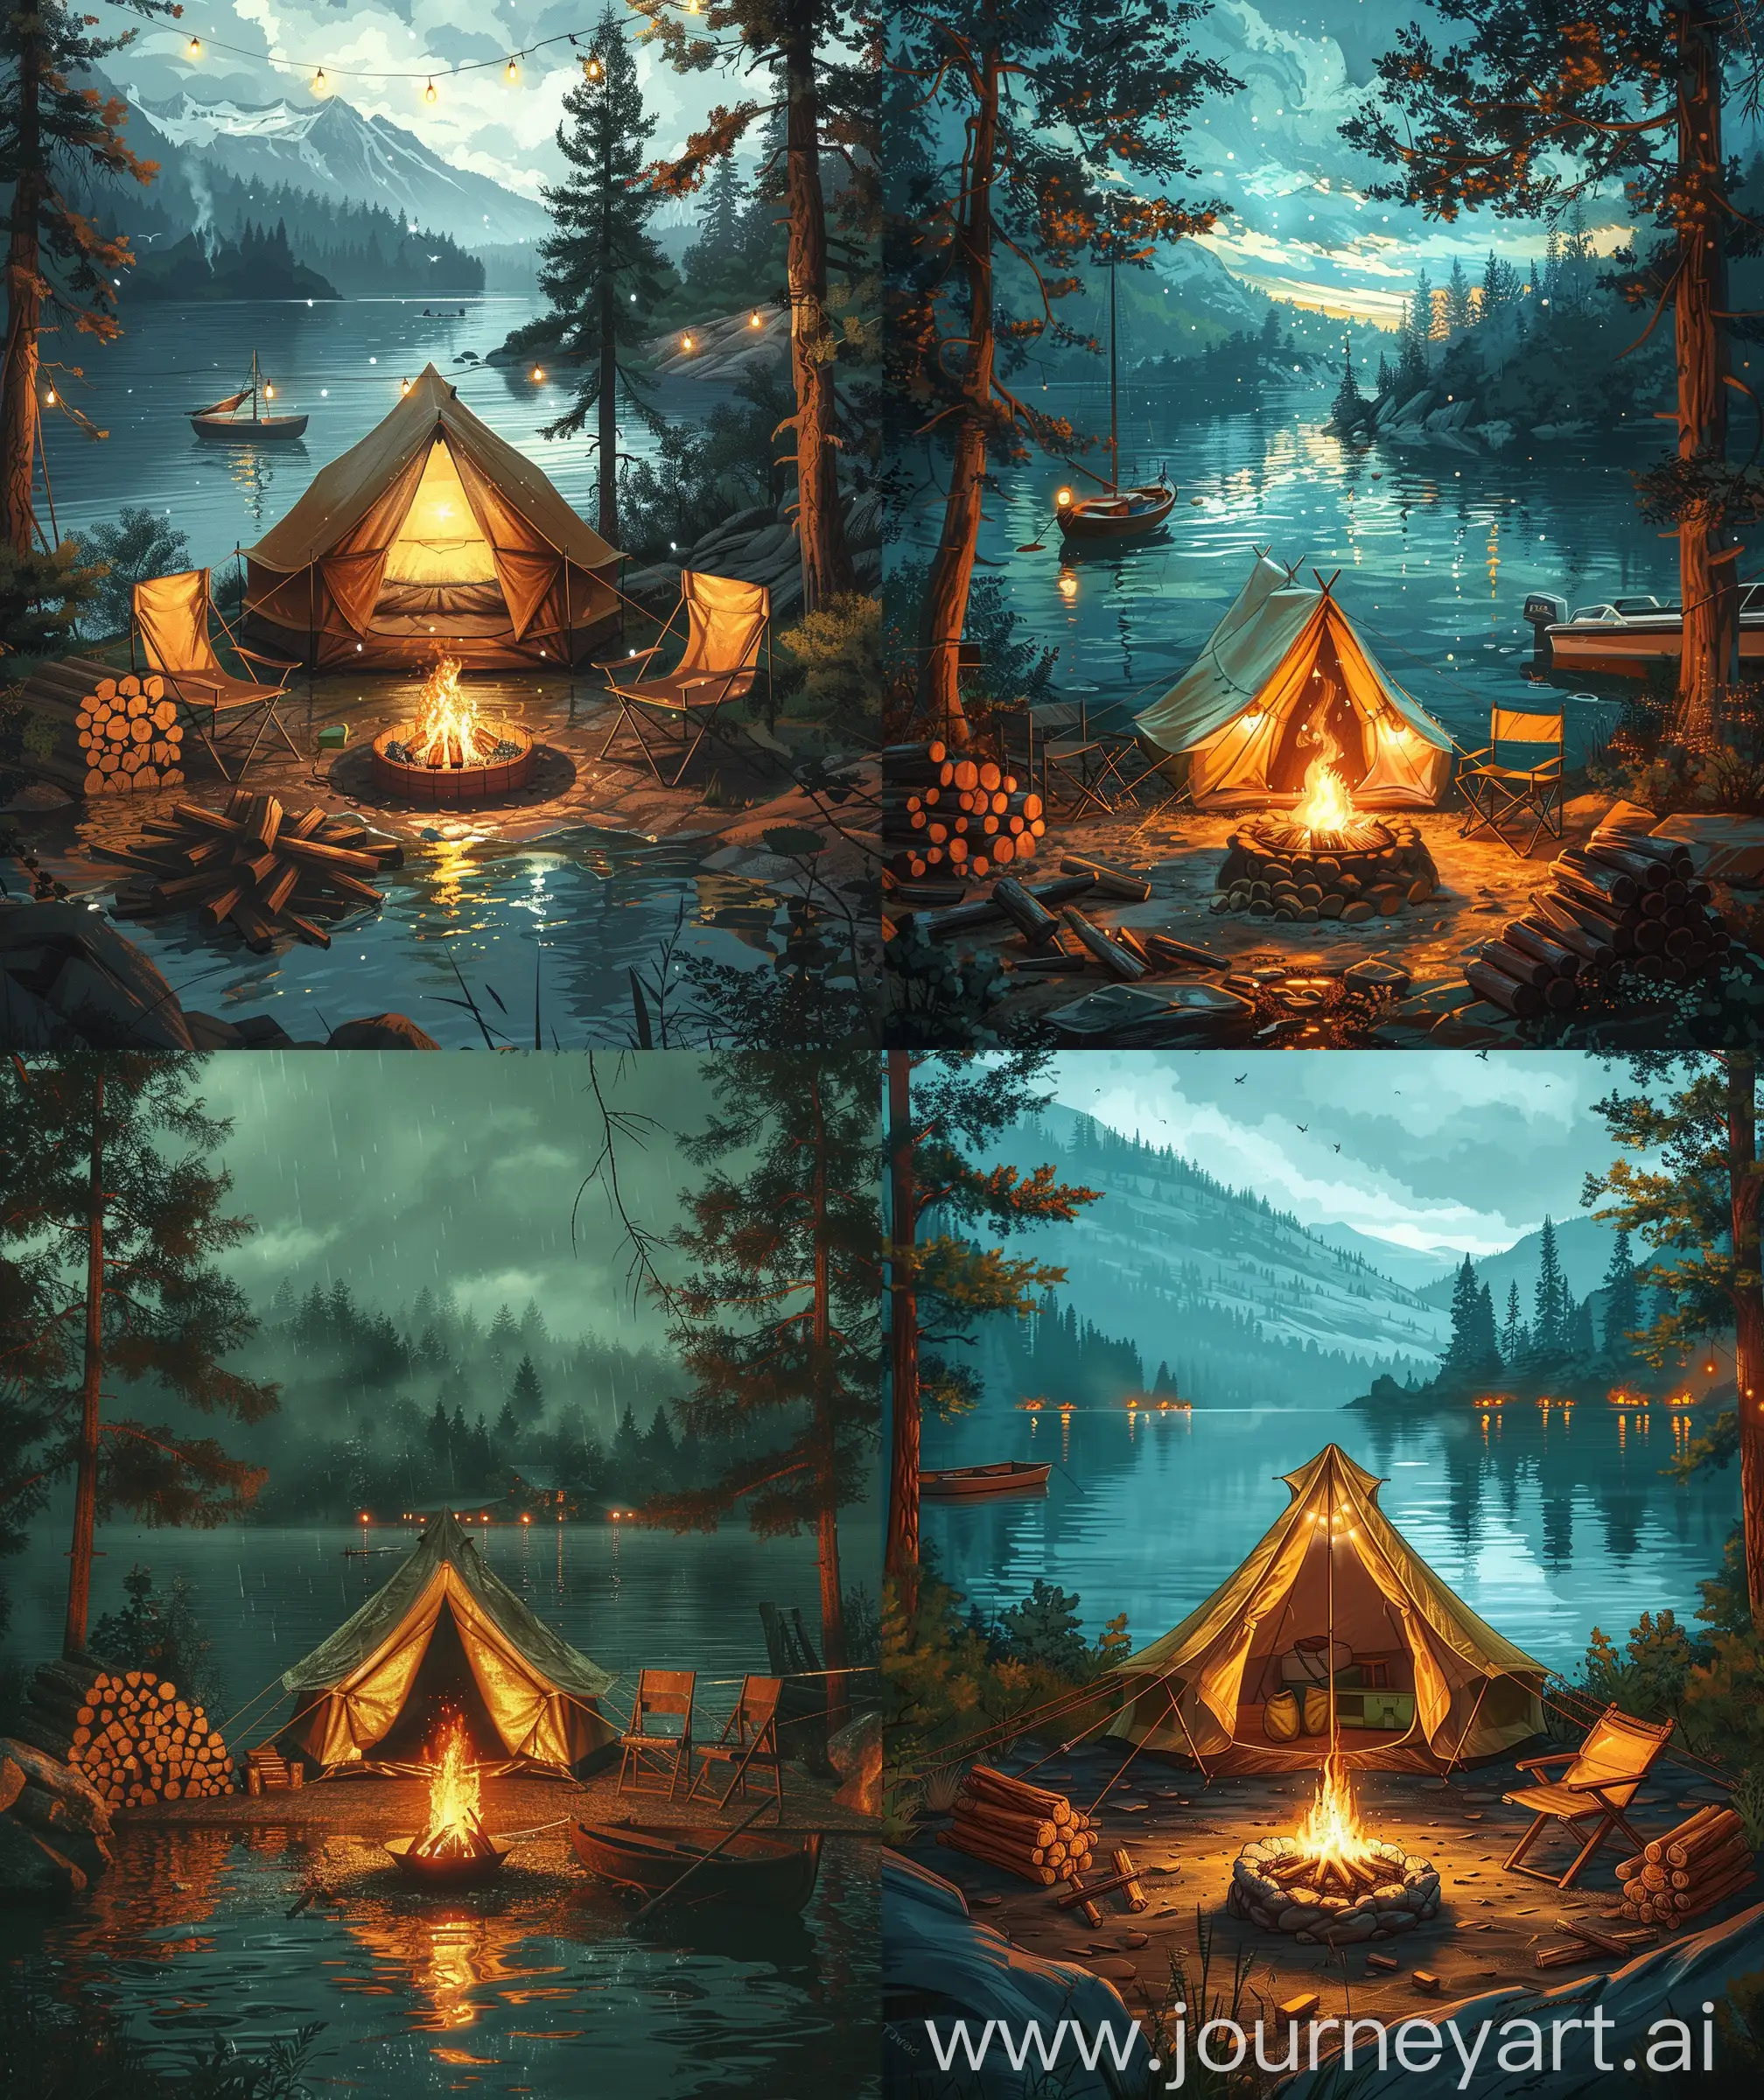 Anime scenary, illustration, vintage, direct front facade view of lake side Camping tent, fire pit front of tent, light around the tent, pile of wood, two chairs beside camping pit, day time , glistening lake side, boat , trees, anime vintage illustration style, High quality resolution, sharp details --ar 27:32 --s 400